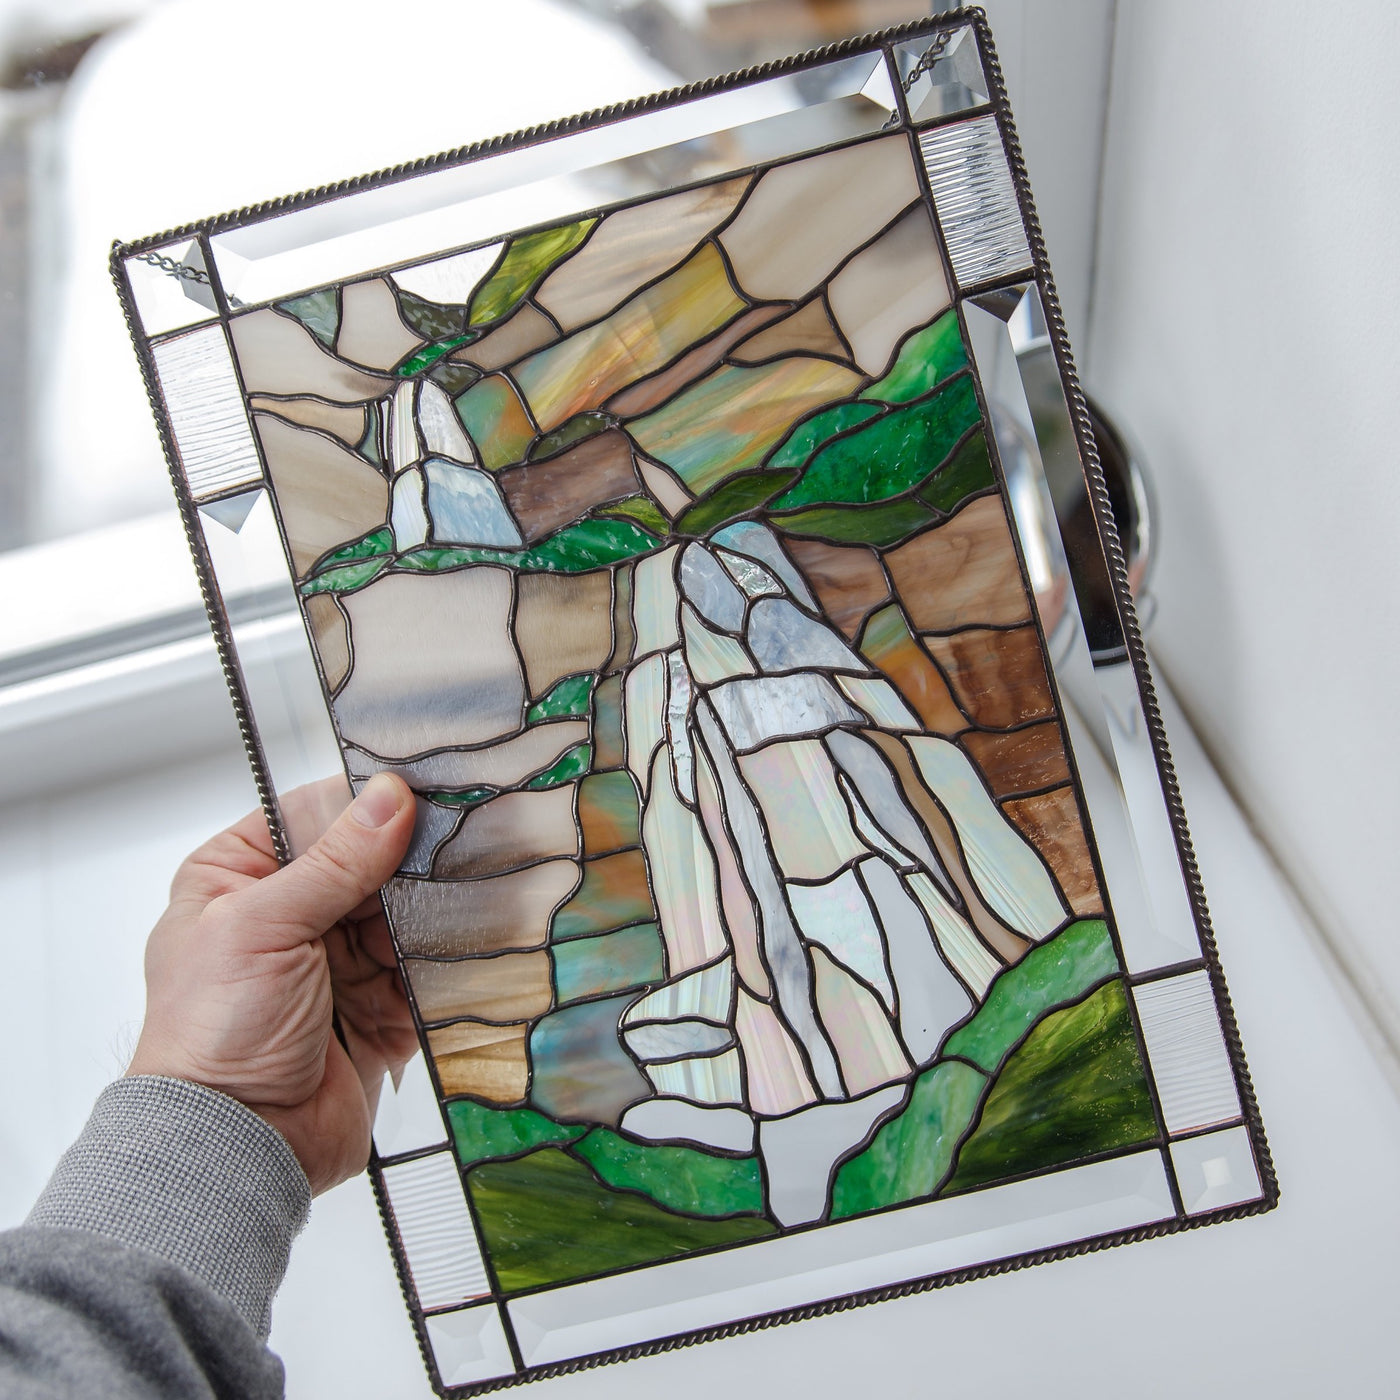 Bridal Veil Falls panel of stained glass for window